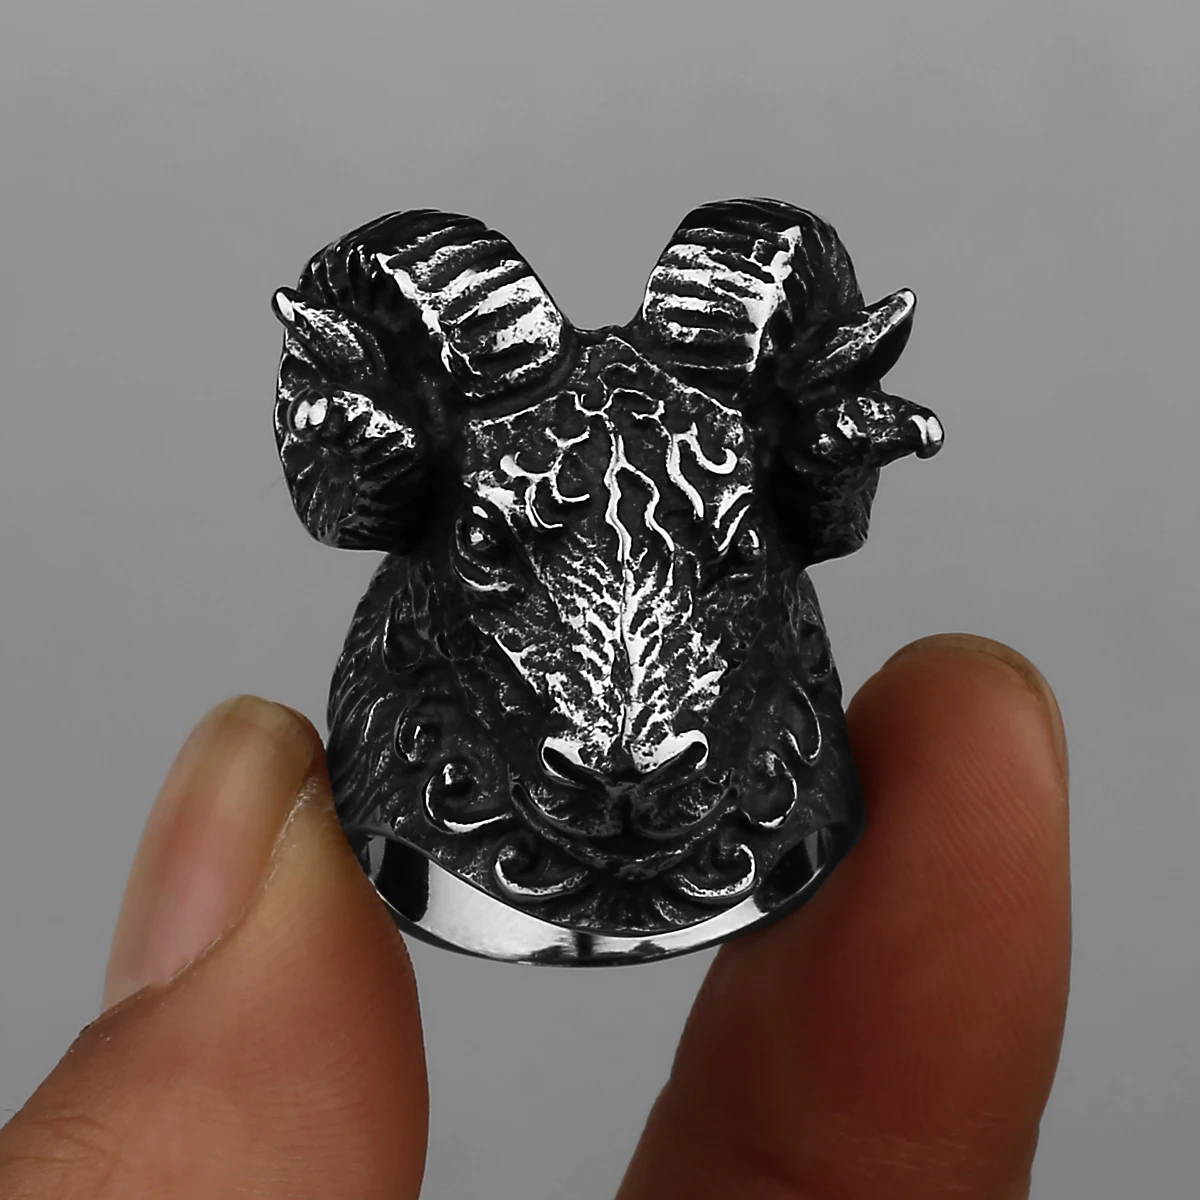 316L Stainless Steel High Quality Tibetan Antelope Animal Rock Punk Personality Sheep Head Ring Heavy Metal Jewelry Wholesale